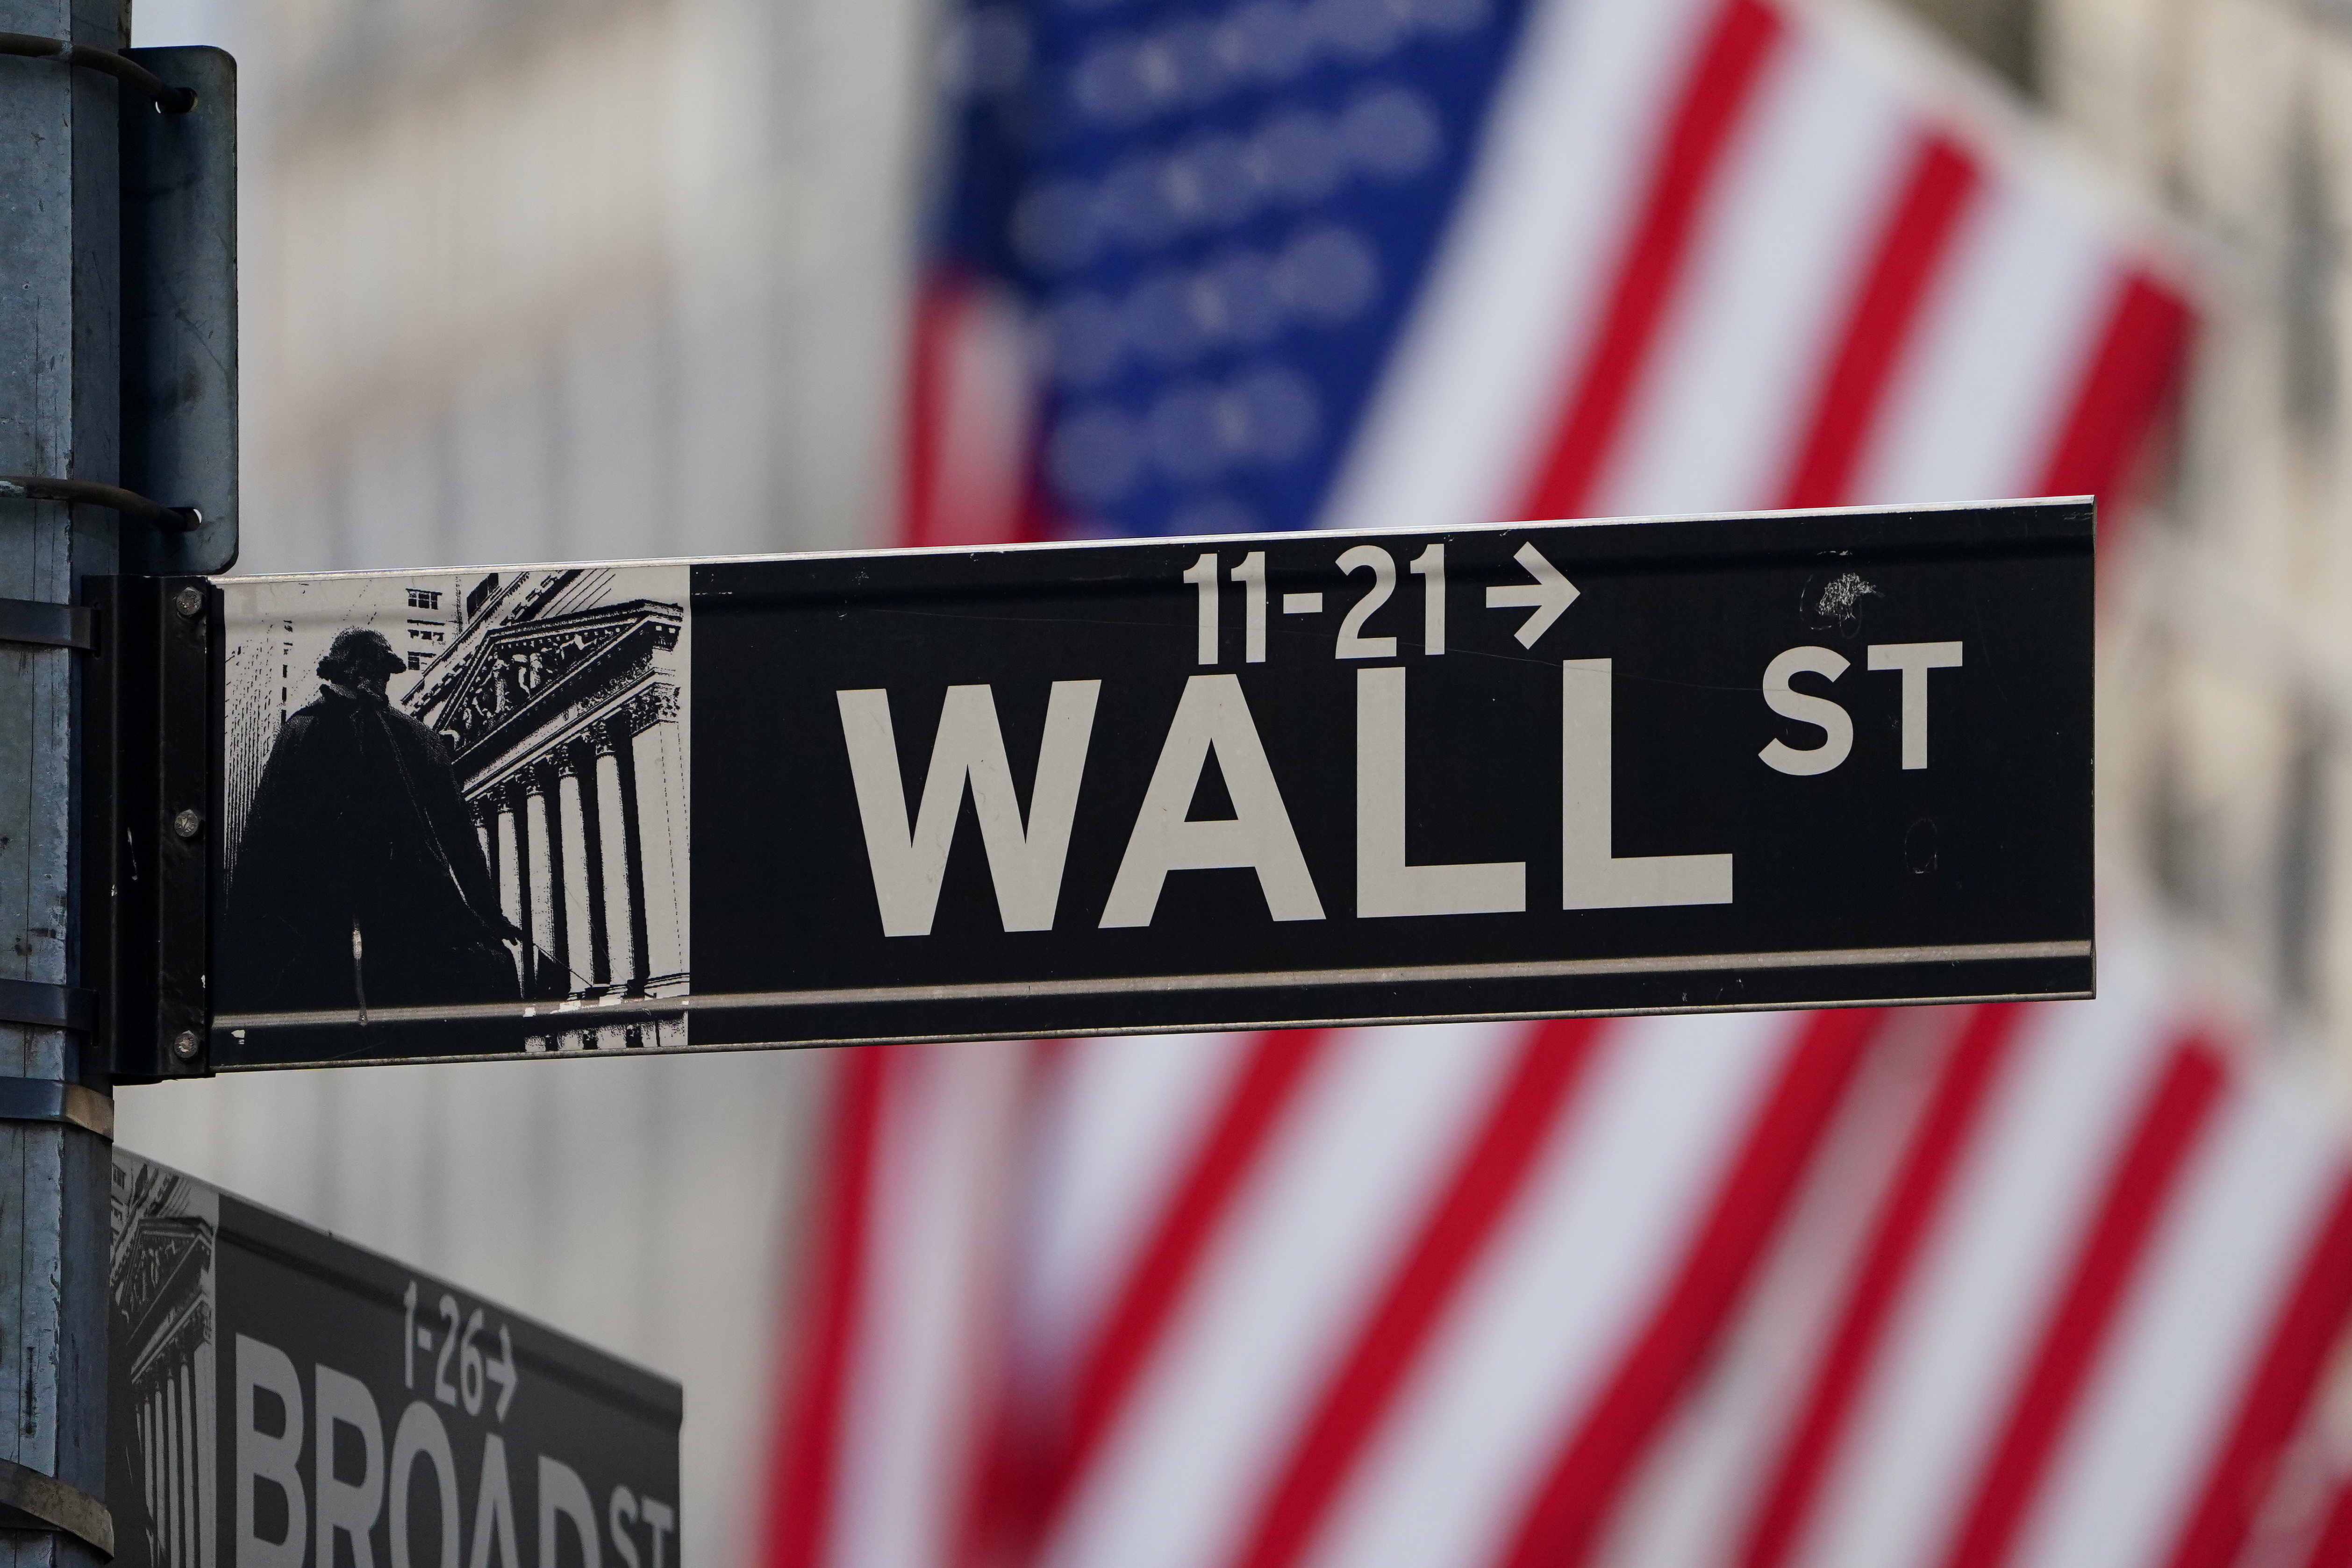 The Wall Street sign is pictured at the New York Stock exchange (NYSE) in the Manhattan borough of New York City, New York, U.S., March 9, 2020. REUTERS/Carlo Allegri/File Photo